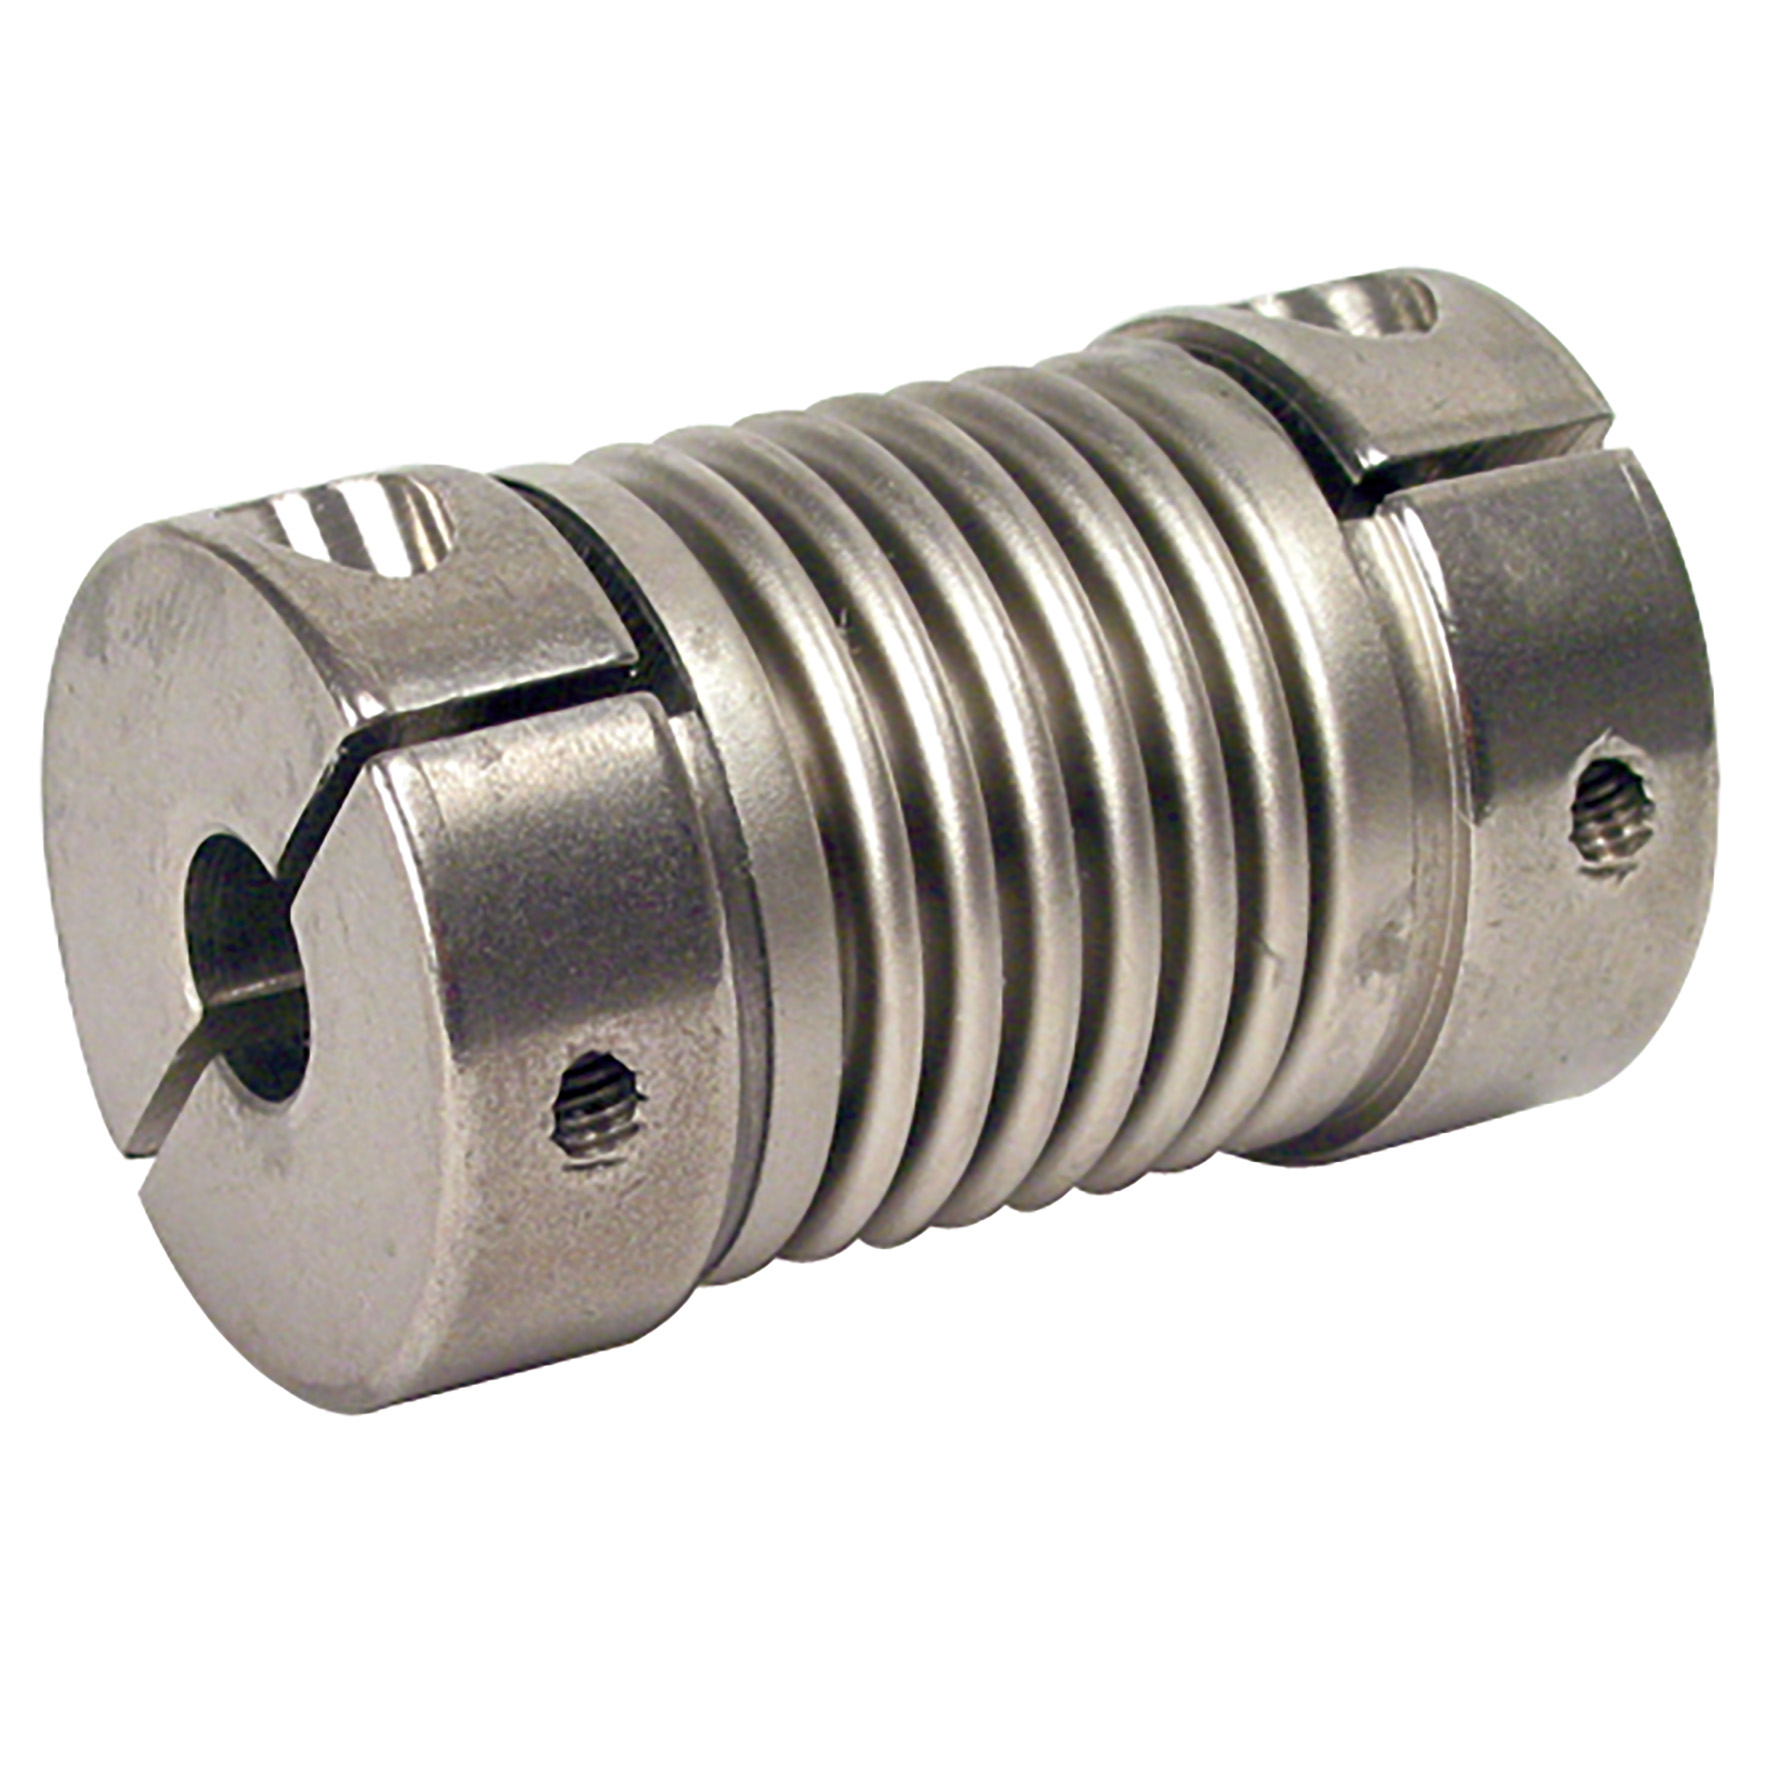 Stainless steel flexible bellows coupling - Stainless steel - with clamping jaw -  - 